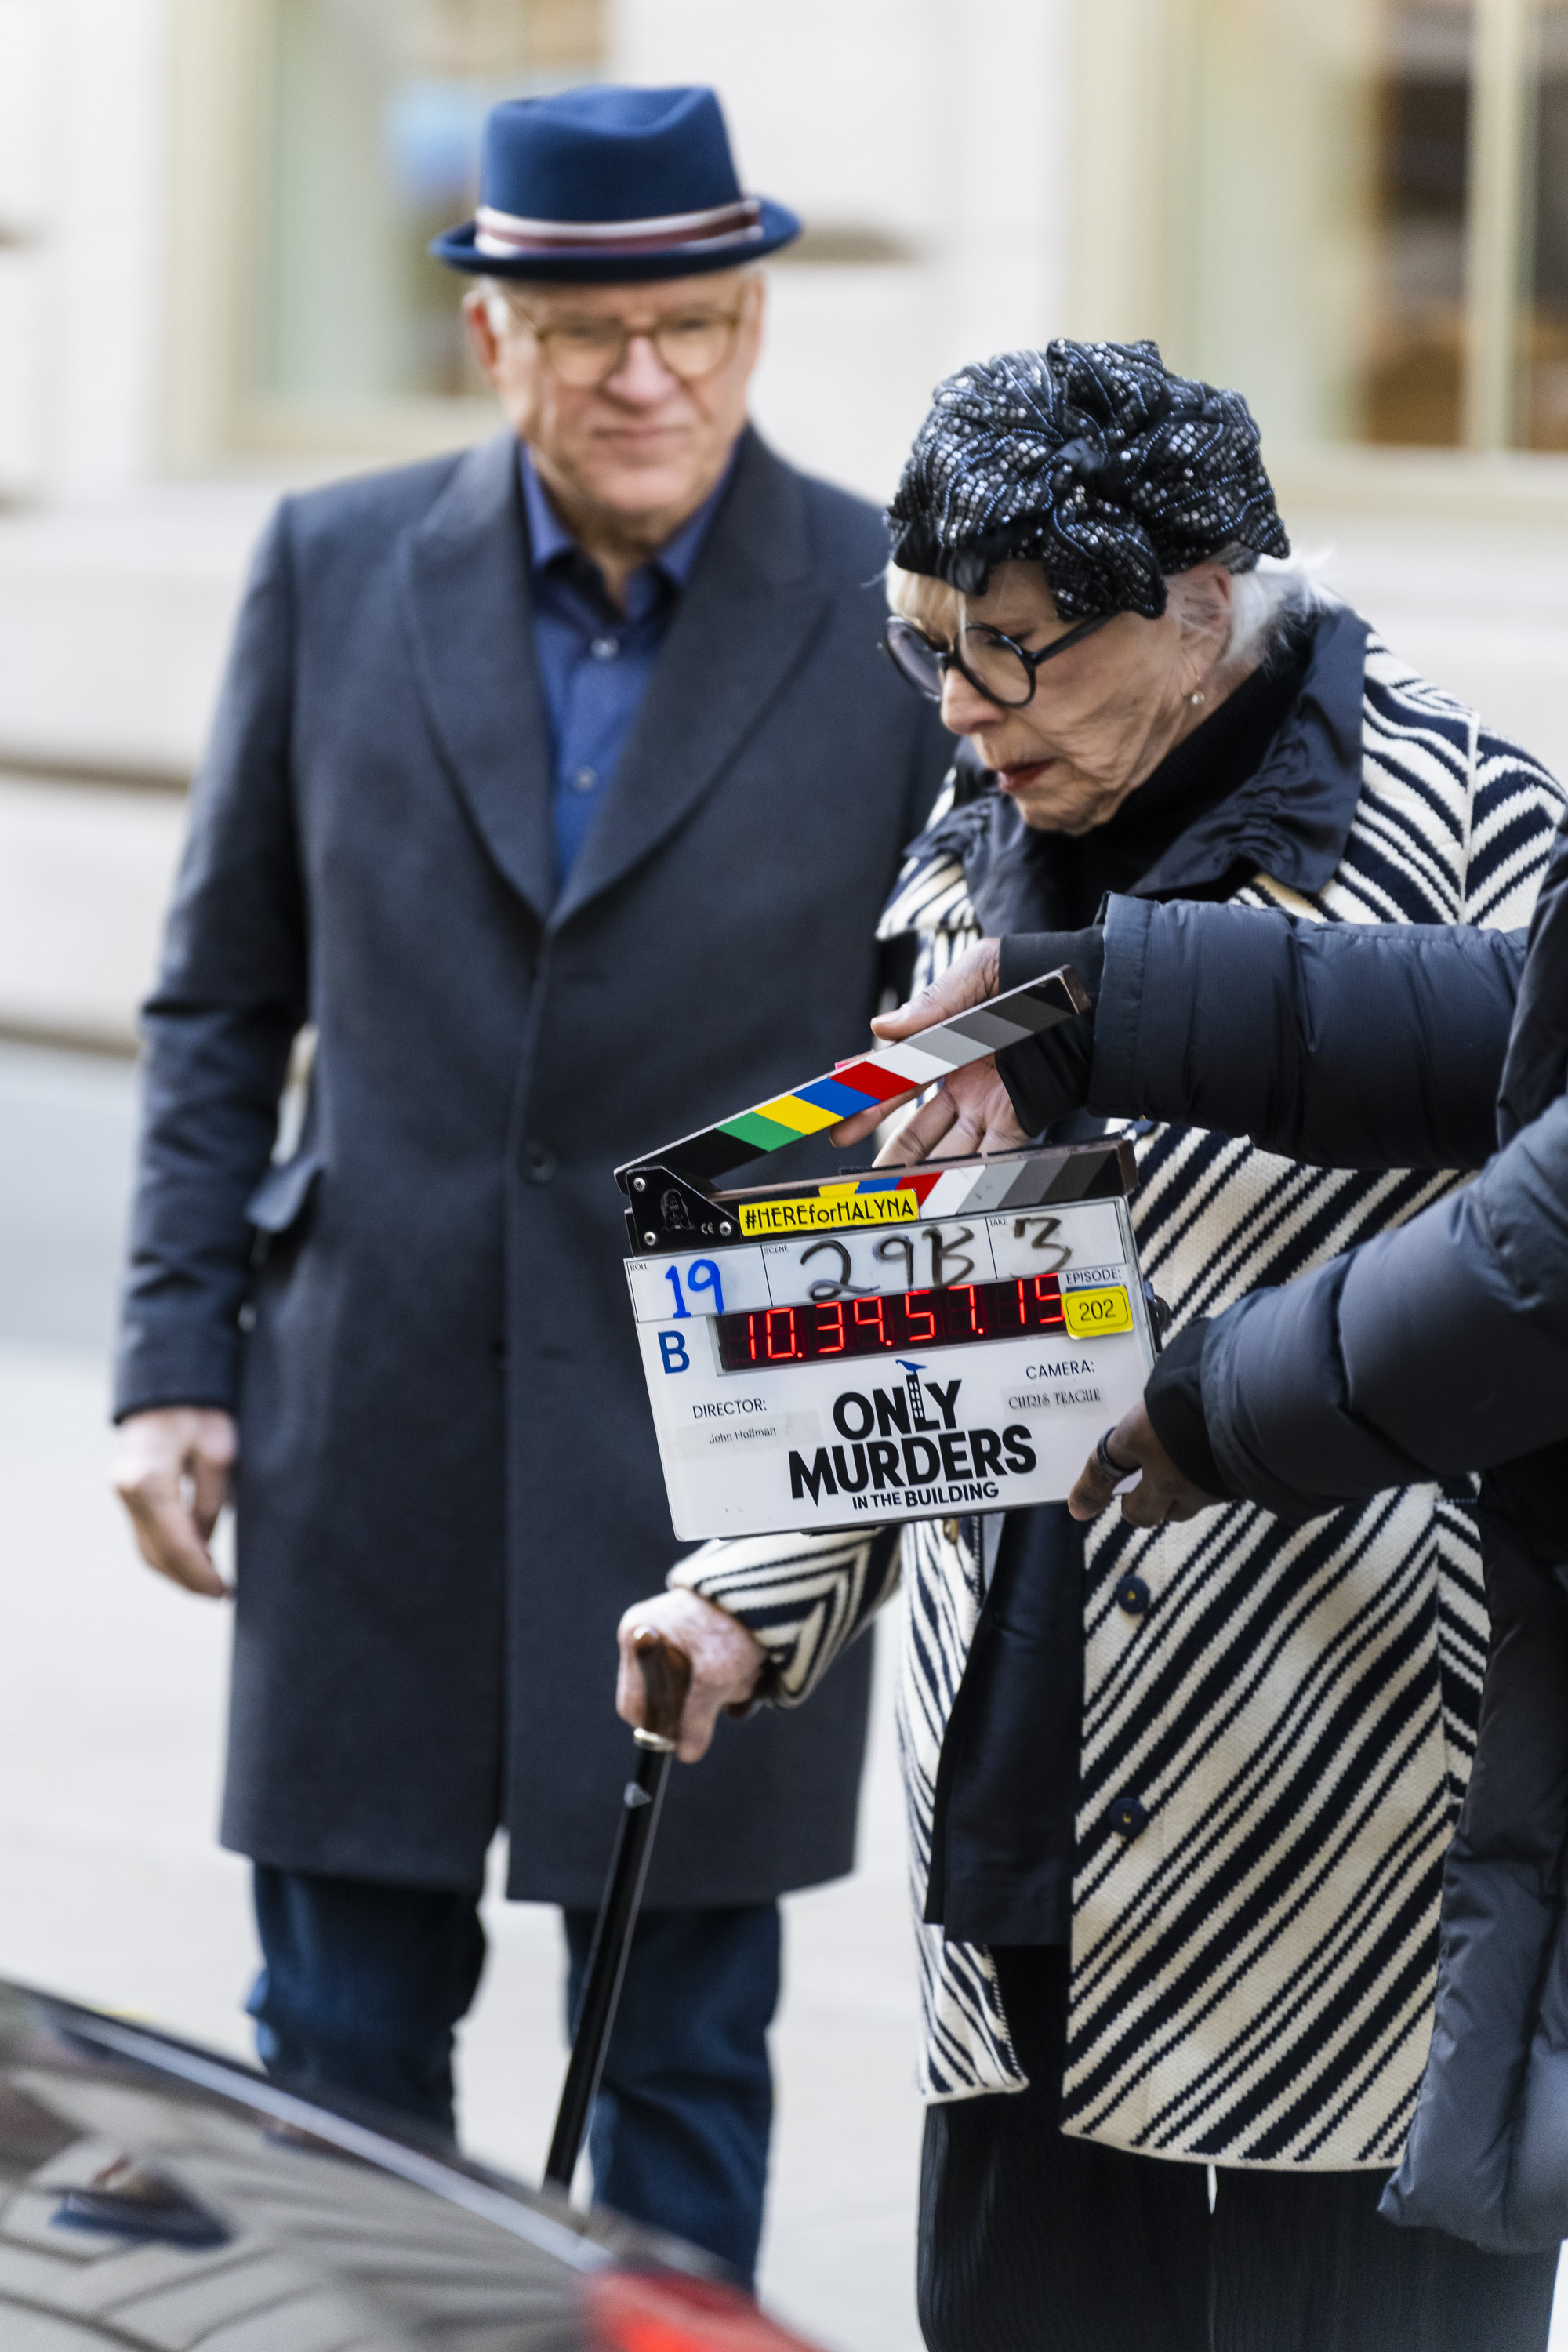 Steve Martin and Shirley MacLaine are seen filming "Only Murders in the Building" season 2 in the Upper West Side on December 07, 2021 in New York City. | Source: Getty Images